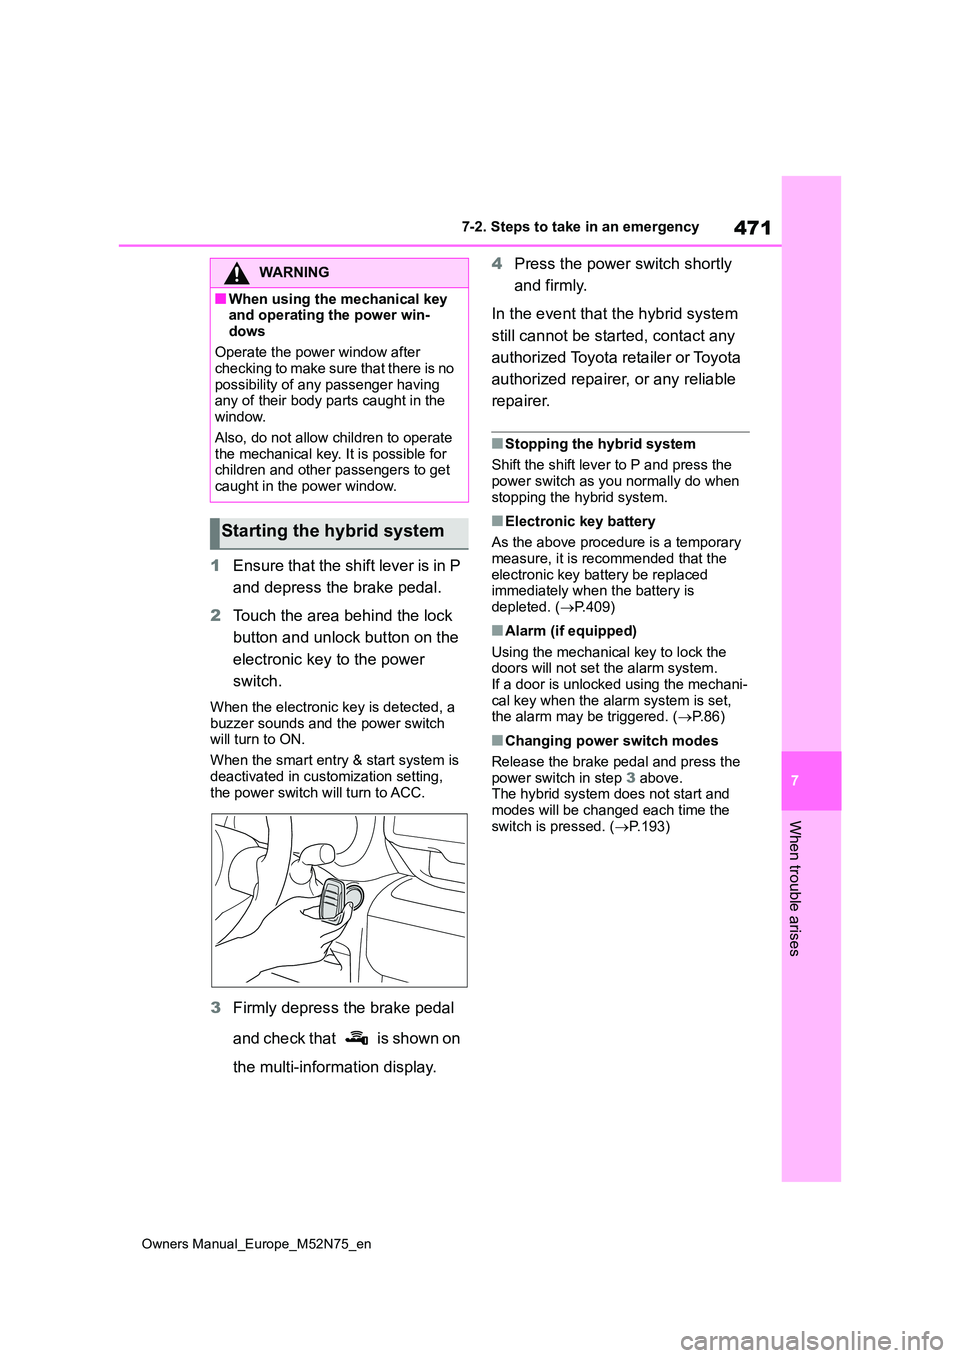 TOYOTA YARIS CROSS 2023  Owners Manual 471
7
Owners Manual_Europe_M52N75_en
7-2. Steps to take in an emergency
When trouble arises
1Ensure that the shift lever is in P  
and depress the brake pedal. 
2 Touch the area behind the lock  
butt